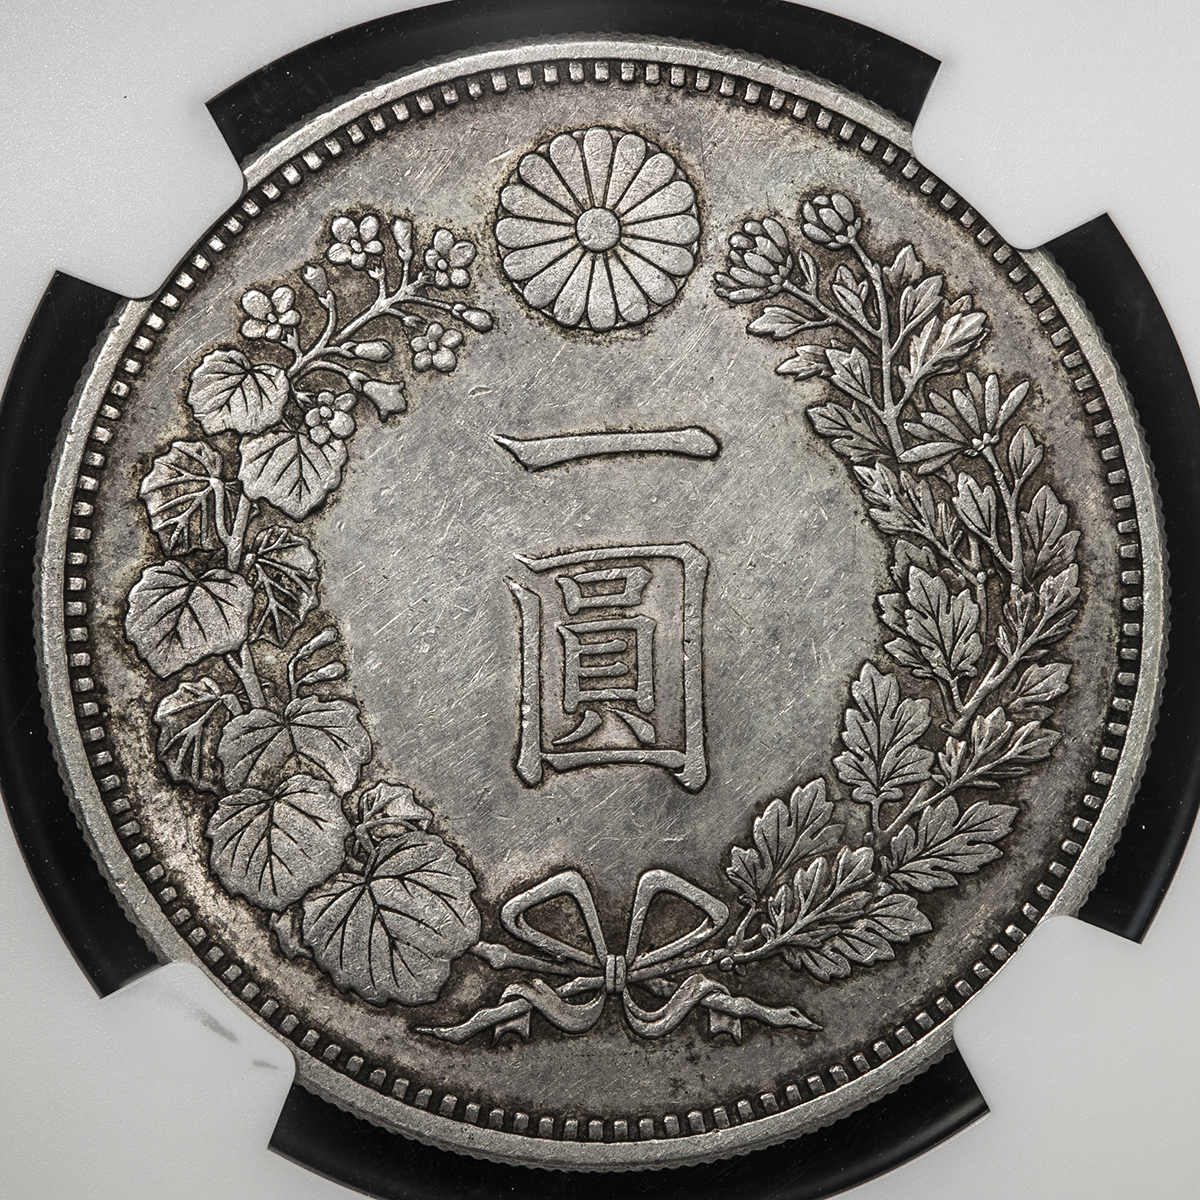 A114 NGC AU58ブリタニア立像貿易銀壹圓銀貨(1930年) - 旧貨幣